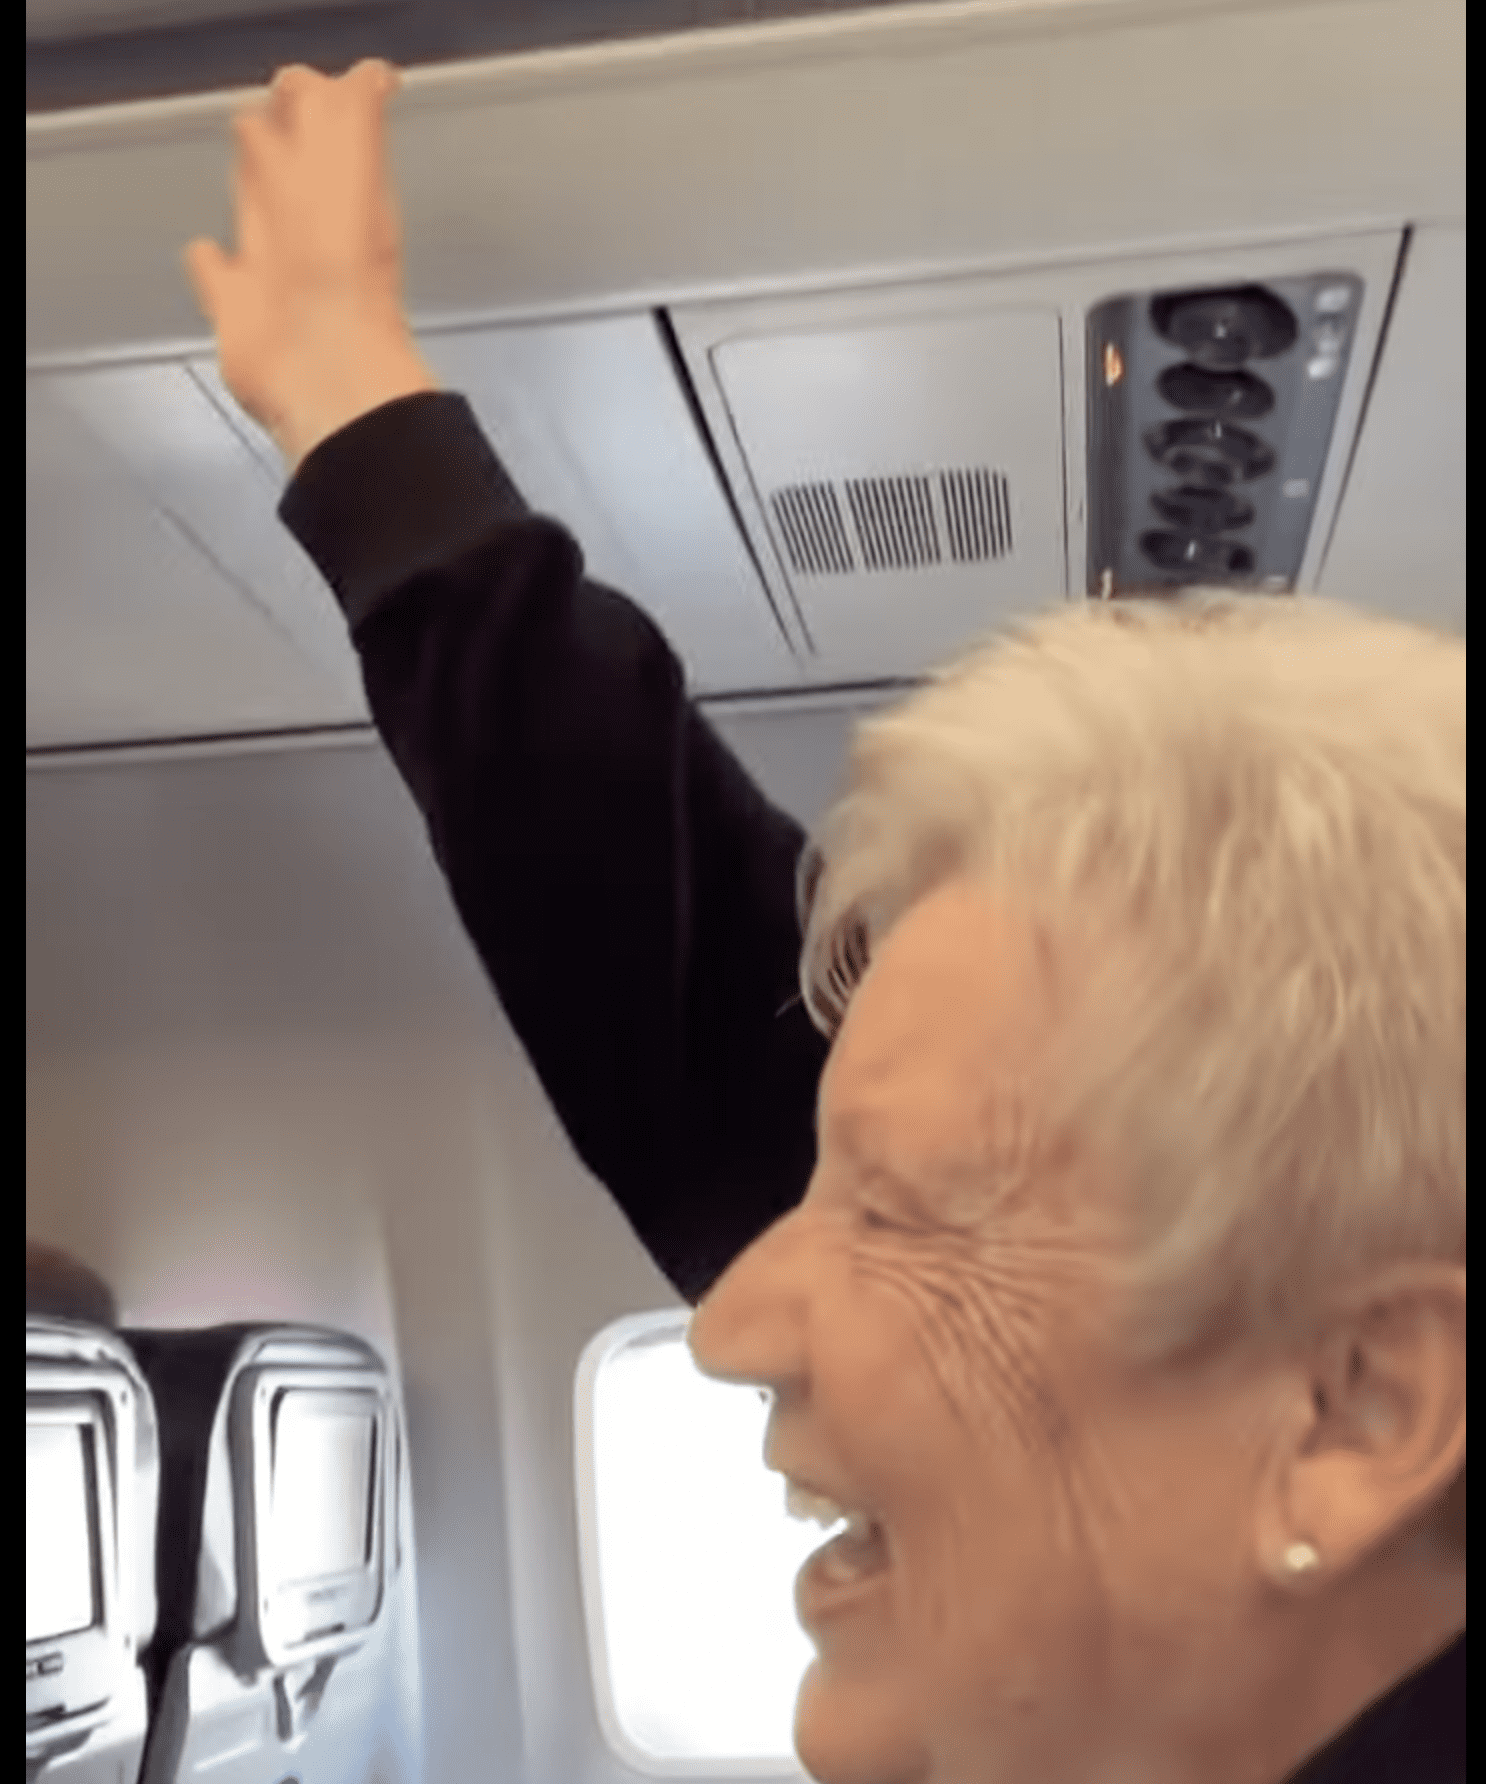 Michelle's mother raised her hand in response to the pilot's announcement. | Photo: youtube.com/Michelle A